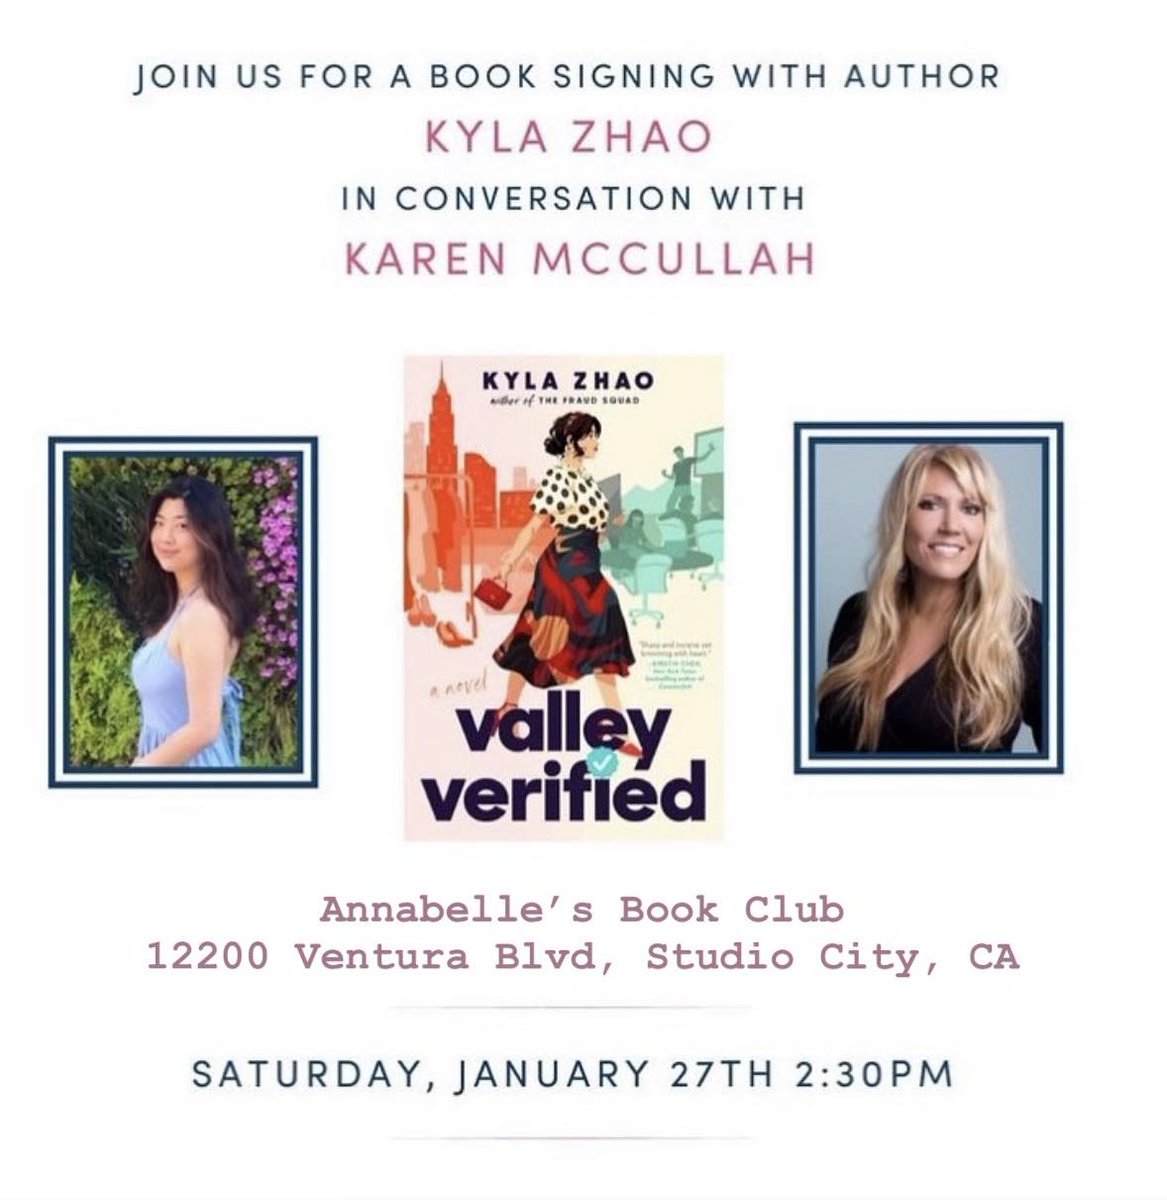 I always say VALLEY VERIFIED is like Legally Blonde—but Elle Woods is tackling Silicon Valley startups So I flipped out when I realized my book event partner is the SCREENWRITER OF LEGALLY BLONDE!🤯 Come hear us chat about writing female underdogs in cutthroat industries!💃👨‍💼